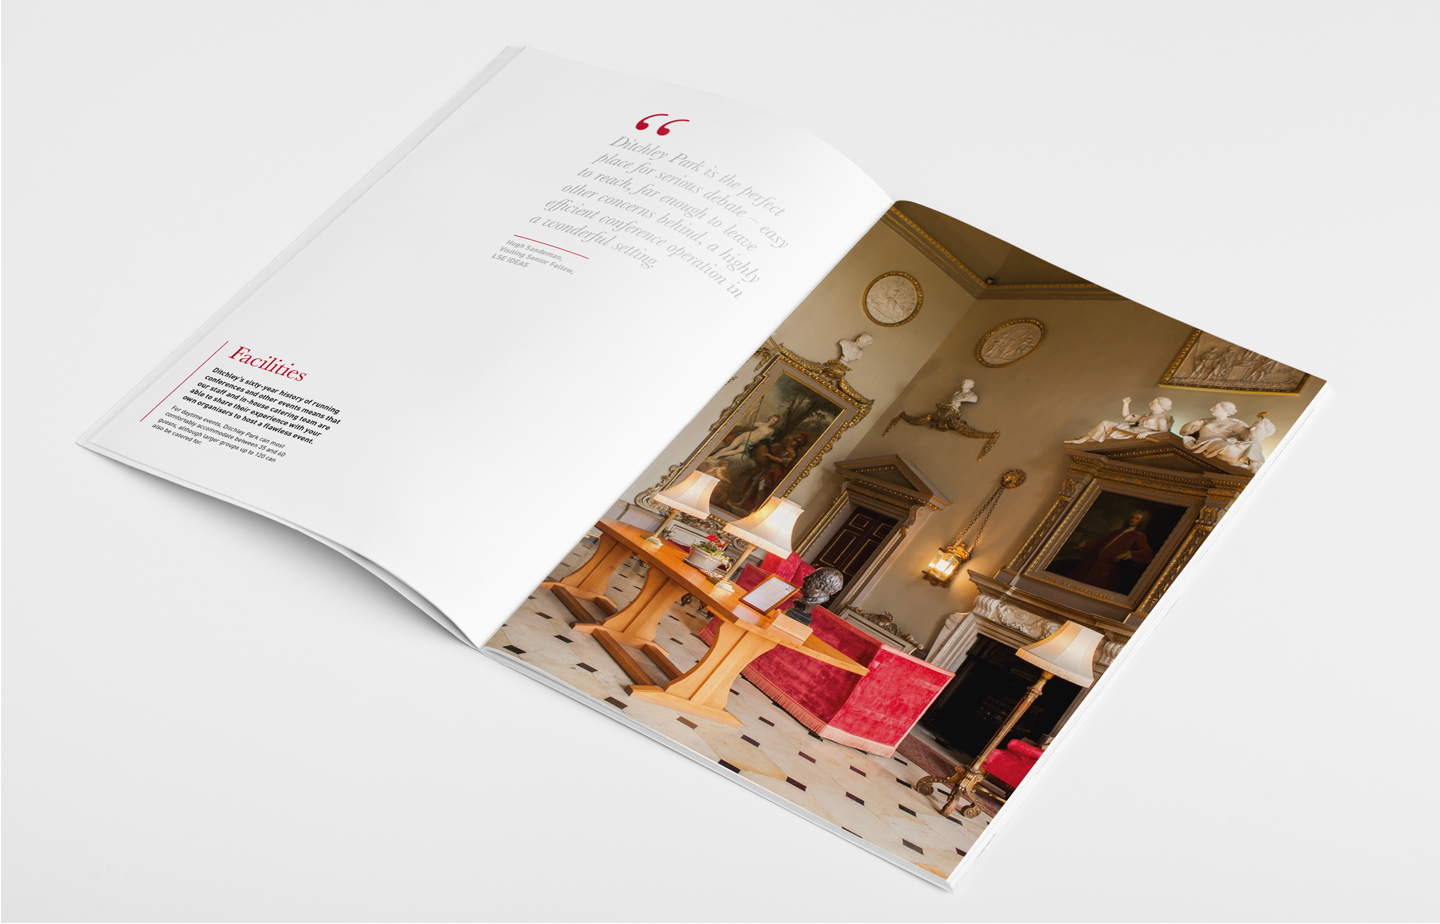 THE DITCHLEY FOUNDATION, Marketing materials